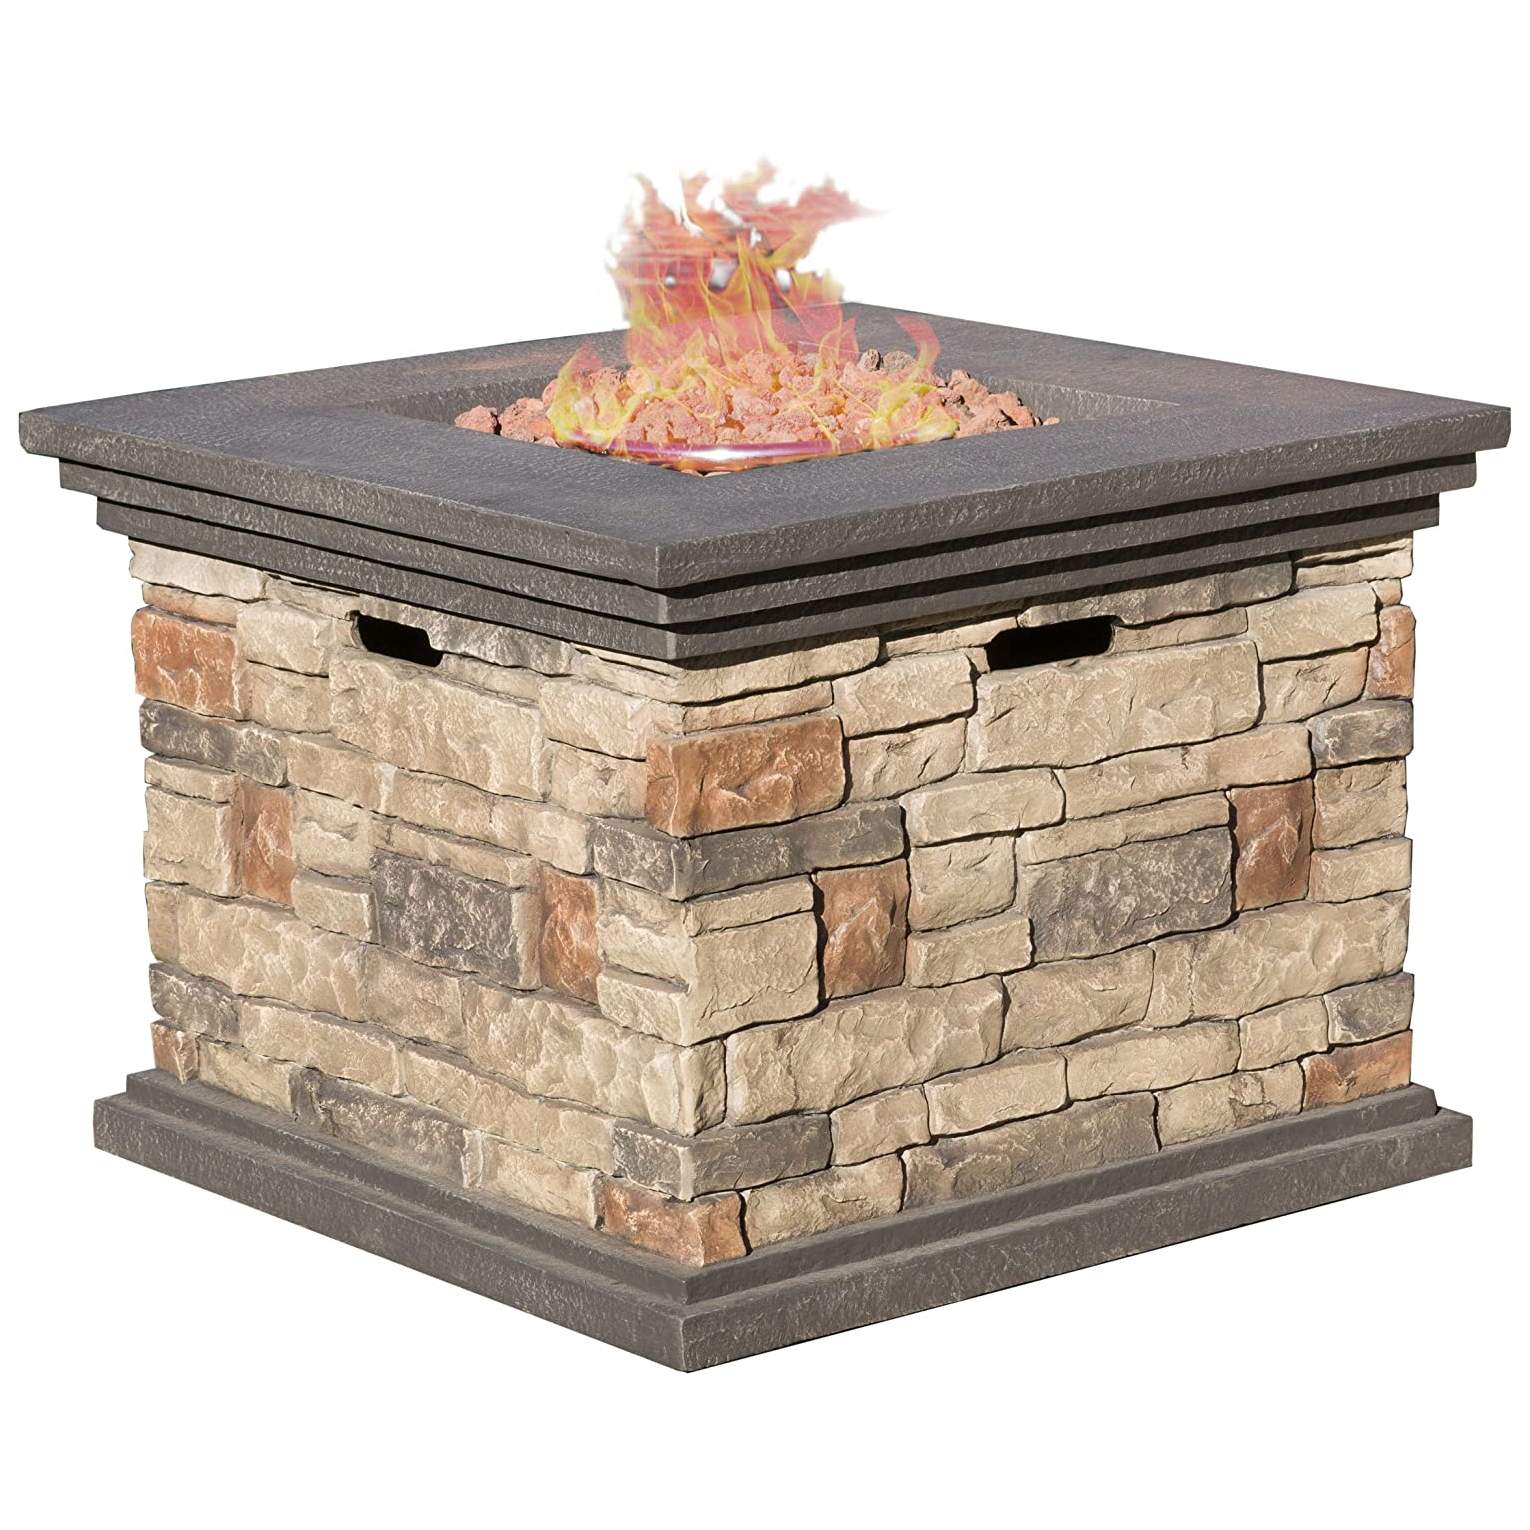 Christopher Knight Home 296587 Crawford Propane Fire Pit